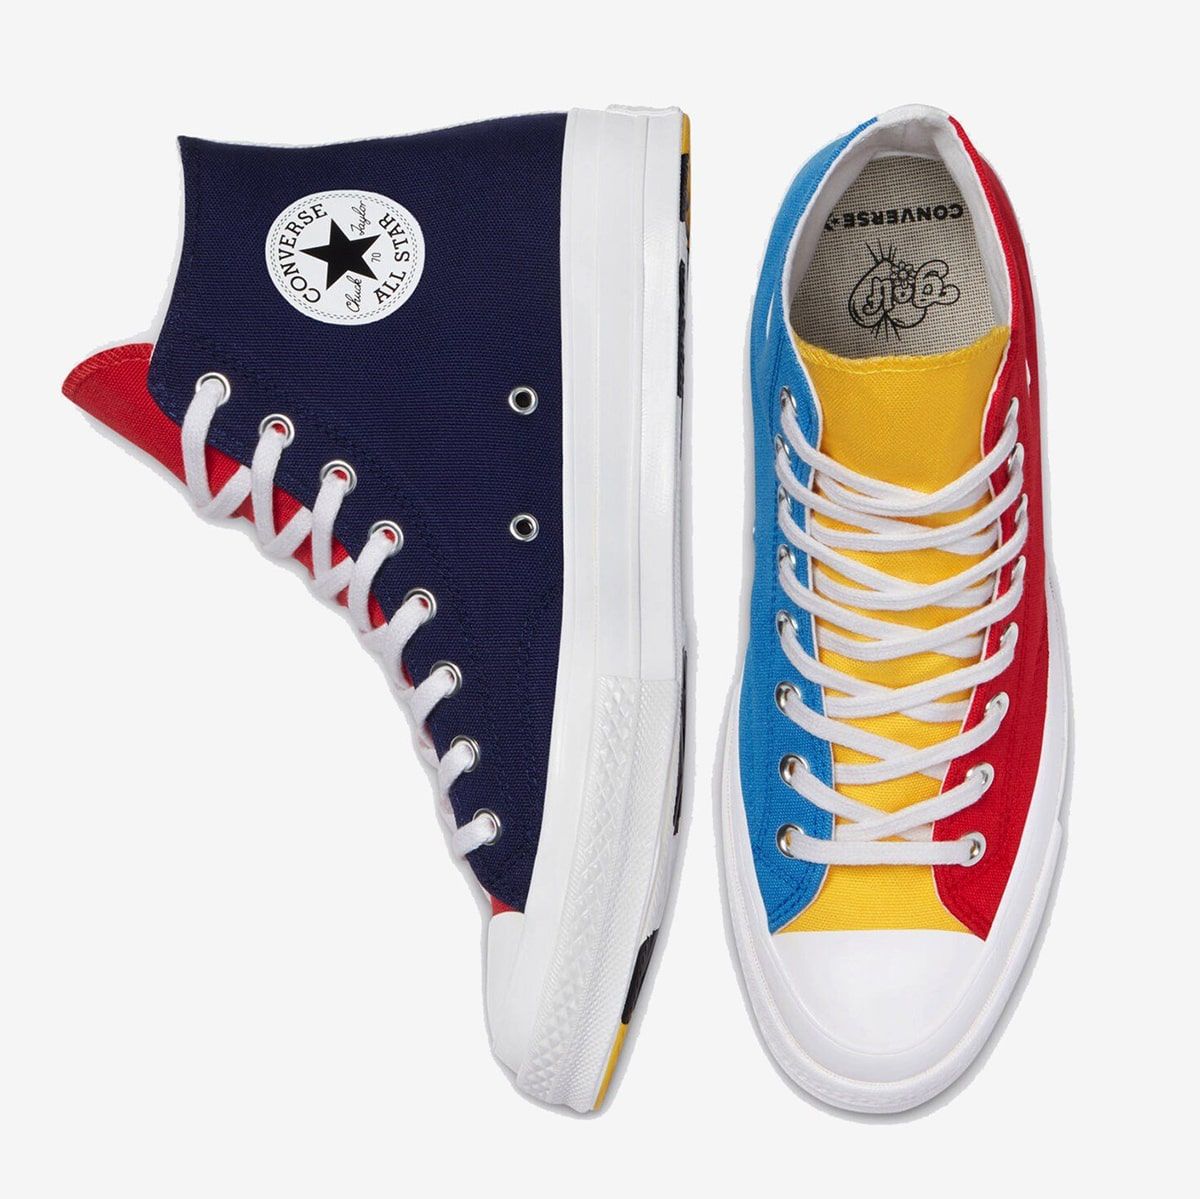 The Converse “Mi Gente” Capsule Expresses the Diversity and ... نظام سهل